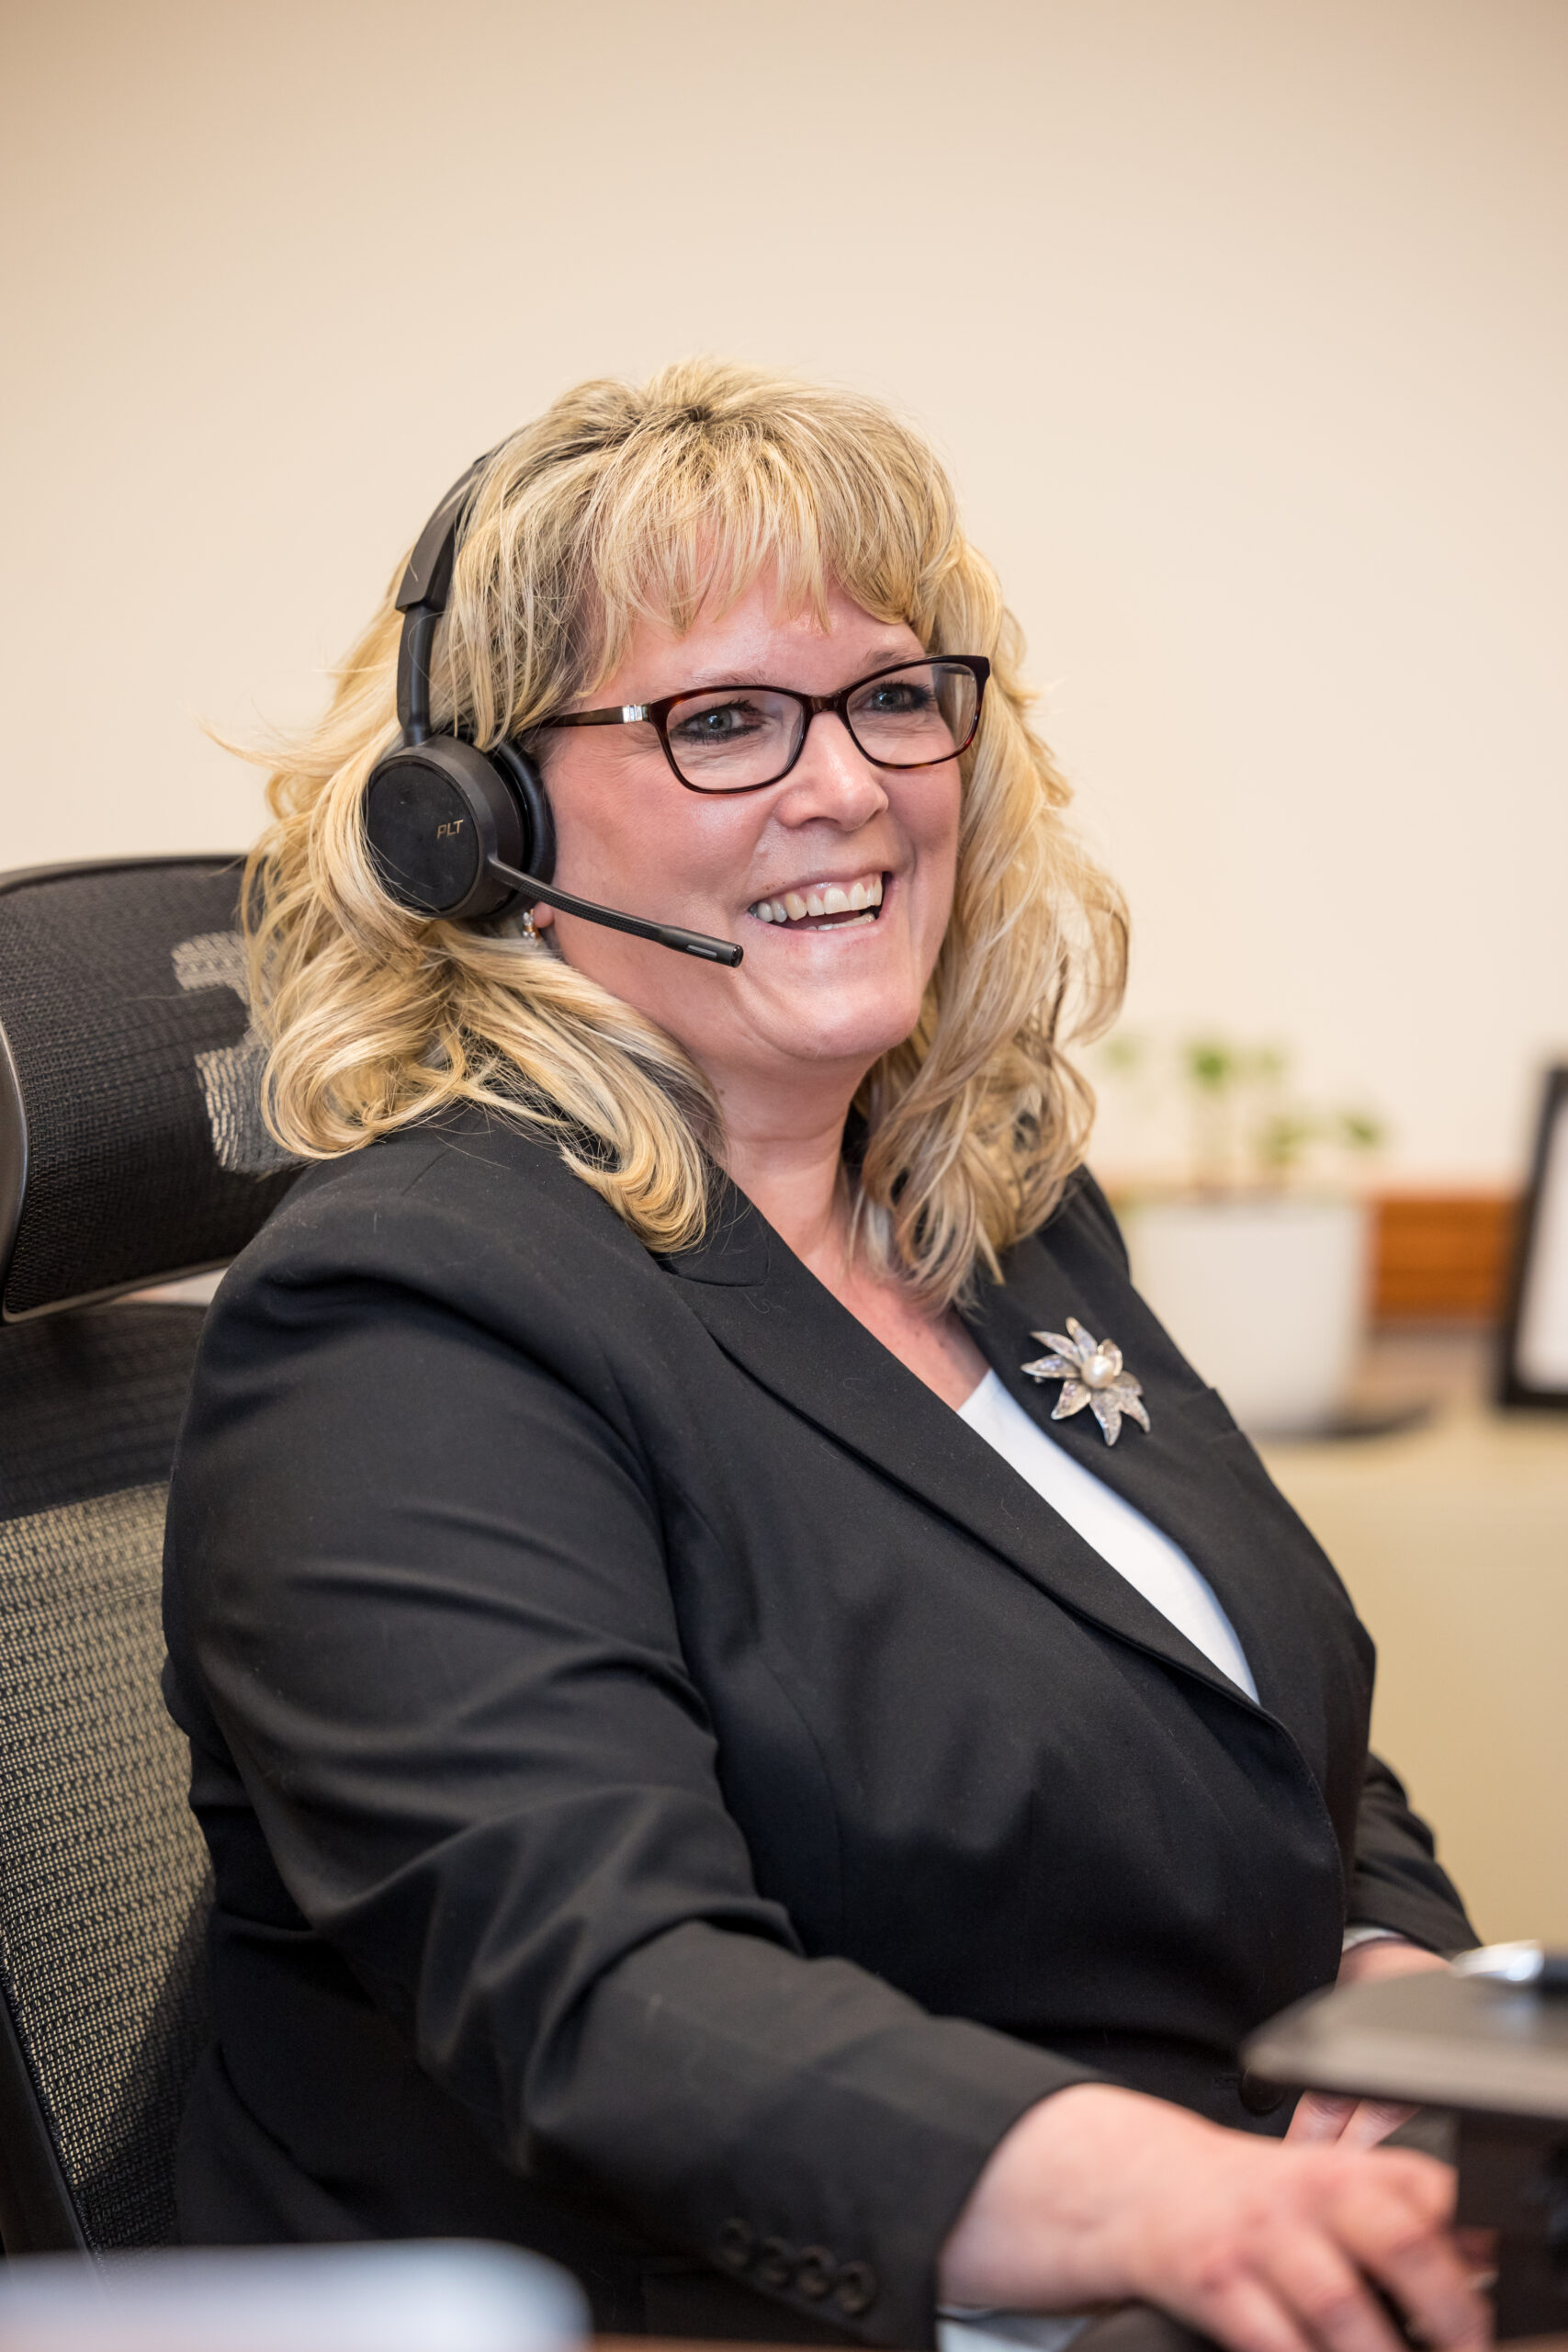 professional female receptionist sitting with headset on